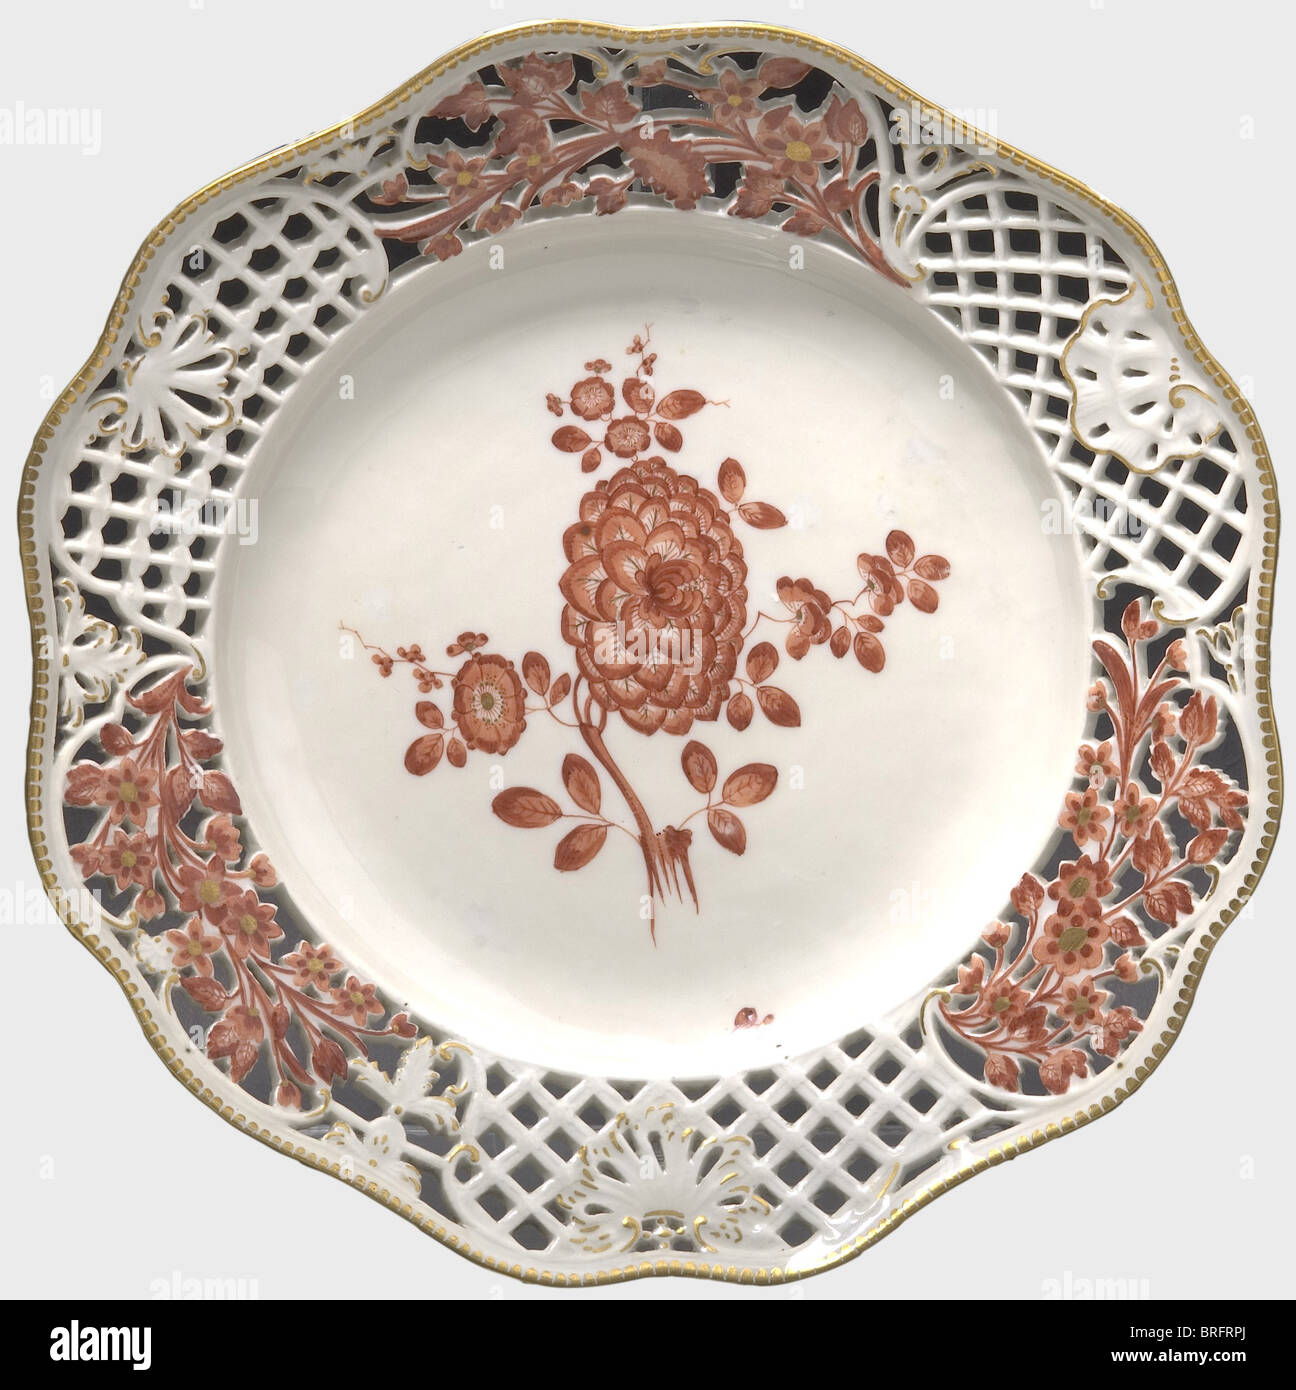 Friedrich II - General Wichard Heinrich von Möllendorff(1724 - 1816).,An openwork plate,Meissen,circa 1762. Openwork border,gold edge,Indian flowery twigs in colcothar and gold. Flowery twigs in the centre. A press number '22' on the back with an underglaze sword mark. In 1761,as a gift to his General von Möllendorff,Frederick the Great ordered a comprehensive table service from the Meissen porcelain factory. Today the service is widely scattered. Cf. The Hoffmeister Collection Catalogue,vol. I. Hamburg,1999,No. 227. historic,historical,18th centur,Additional-Rights-Clearences-Not Available Stock Photo